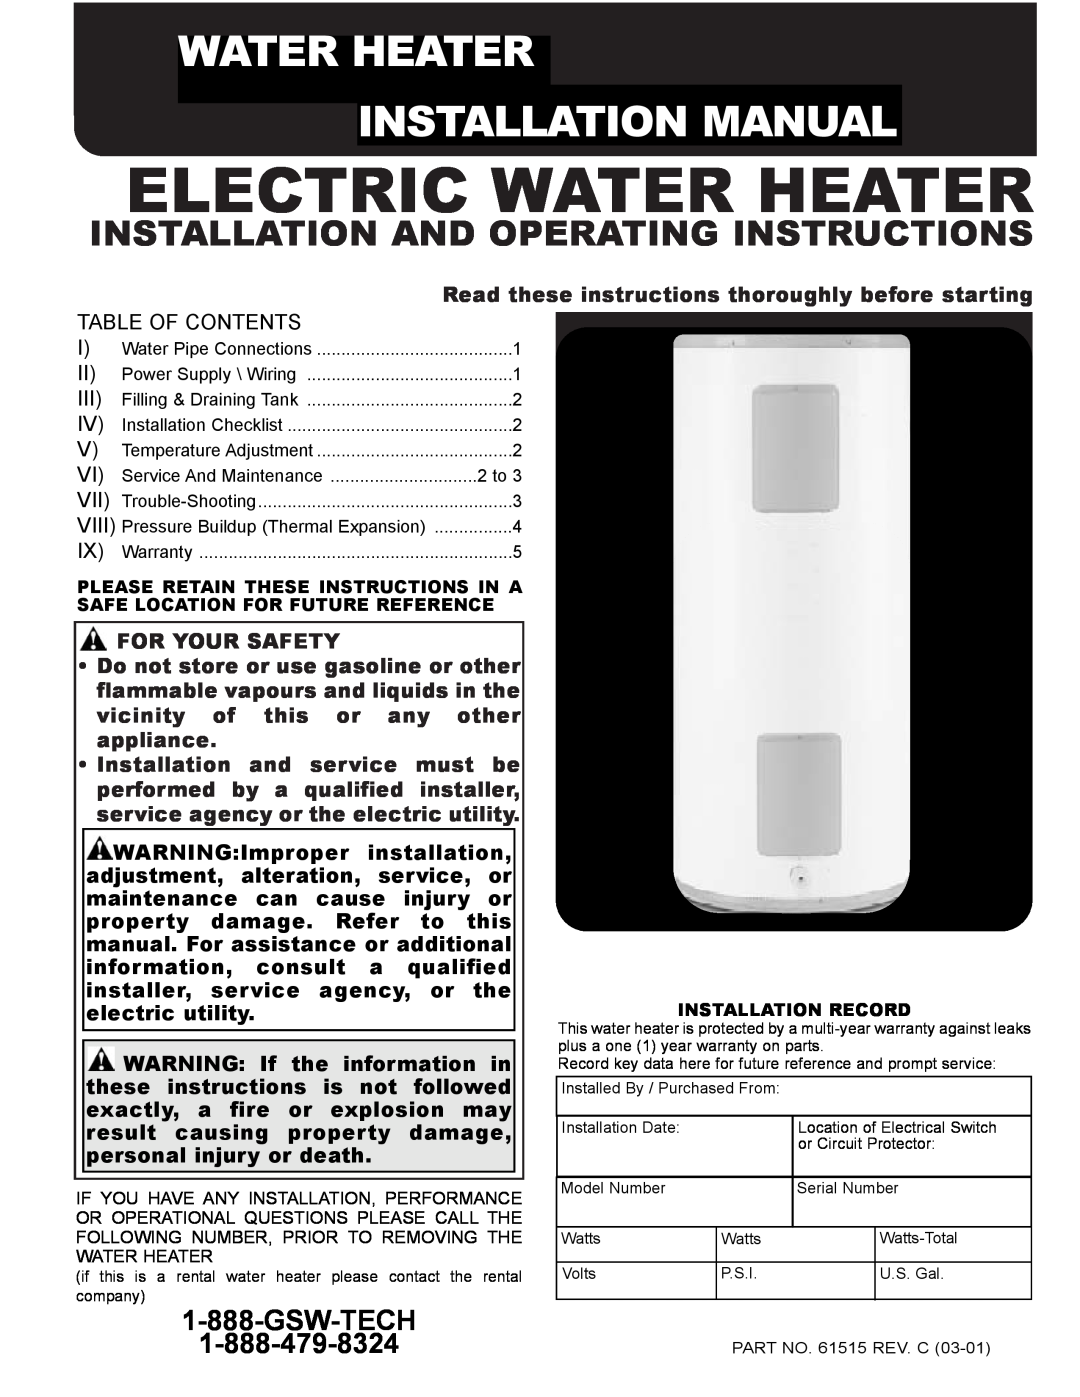 GSW installation manual Electric Water Heater, Water Heater Installation Manual, Gsw-Tech, For Your Safety 